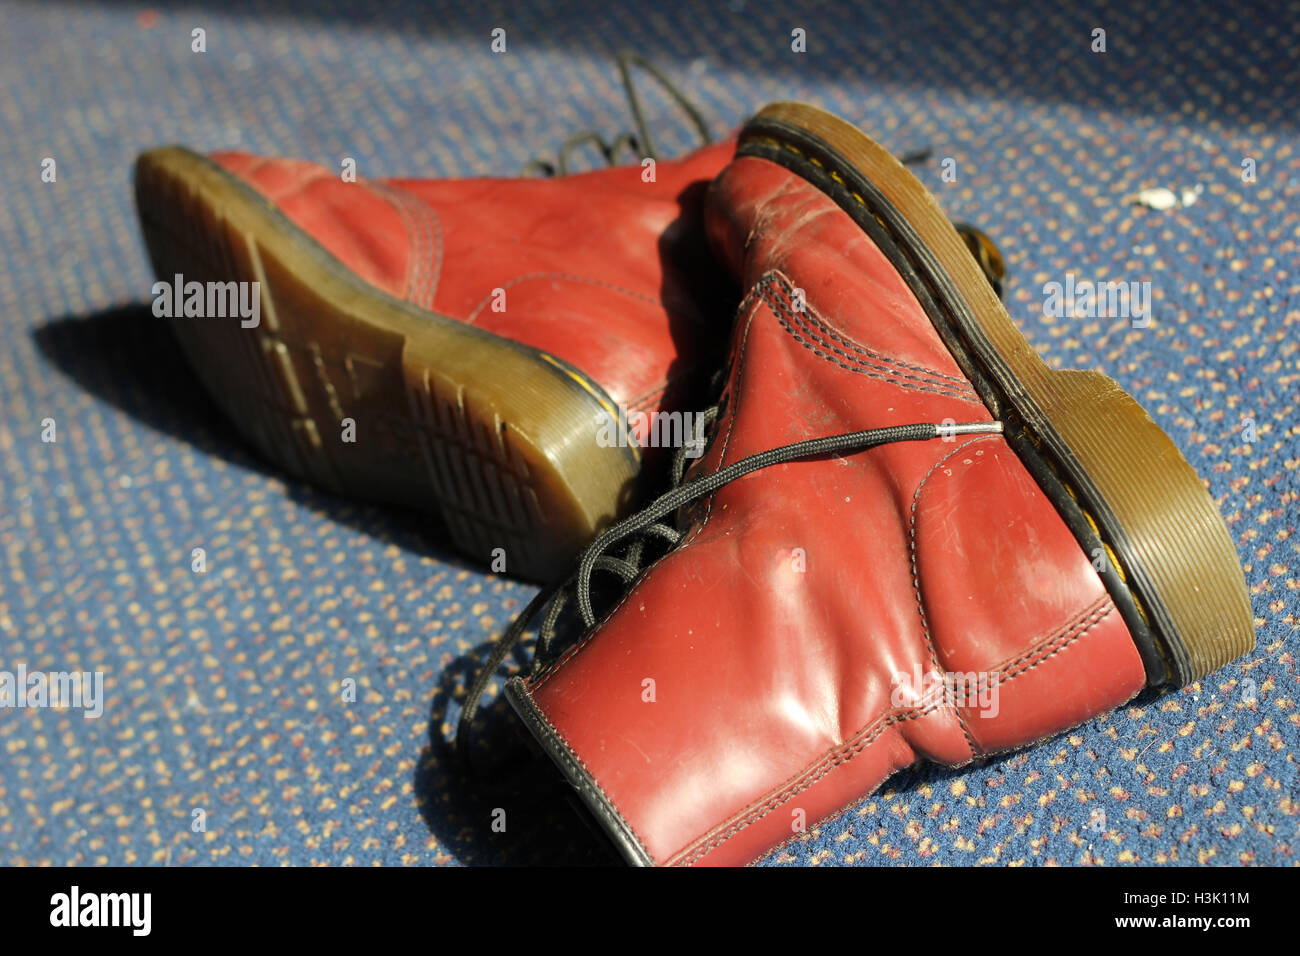 https://c8.alamy.com/comp/H3K11M/cardiff-wales-22nd-sept-2014-a-pair-of-red-lace-up-boots-sits-on-carpet-H3K11M.jpg